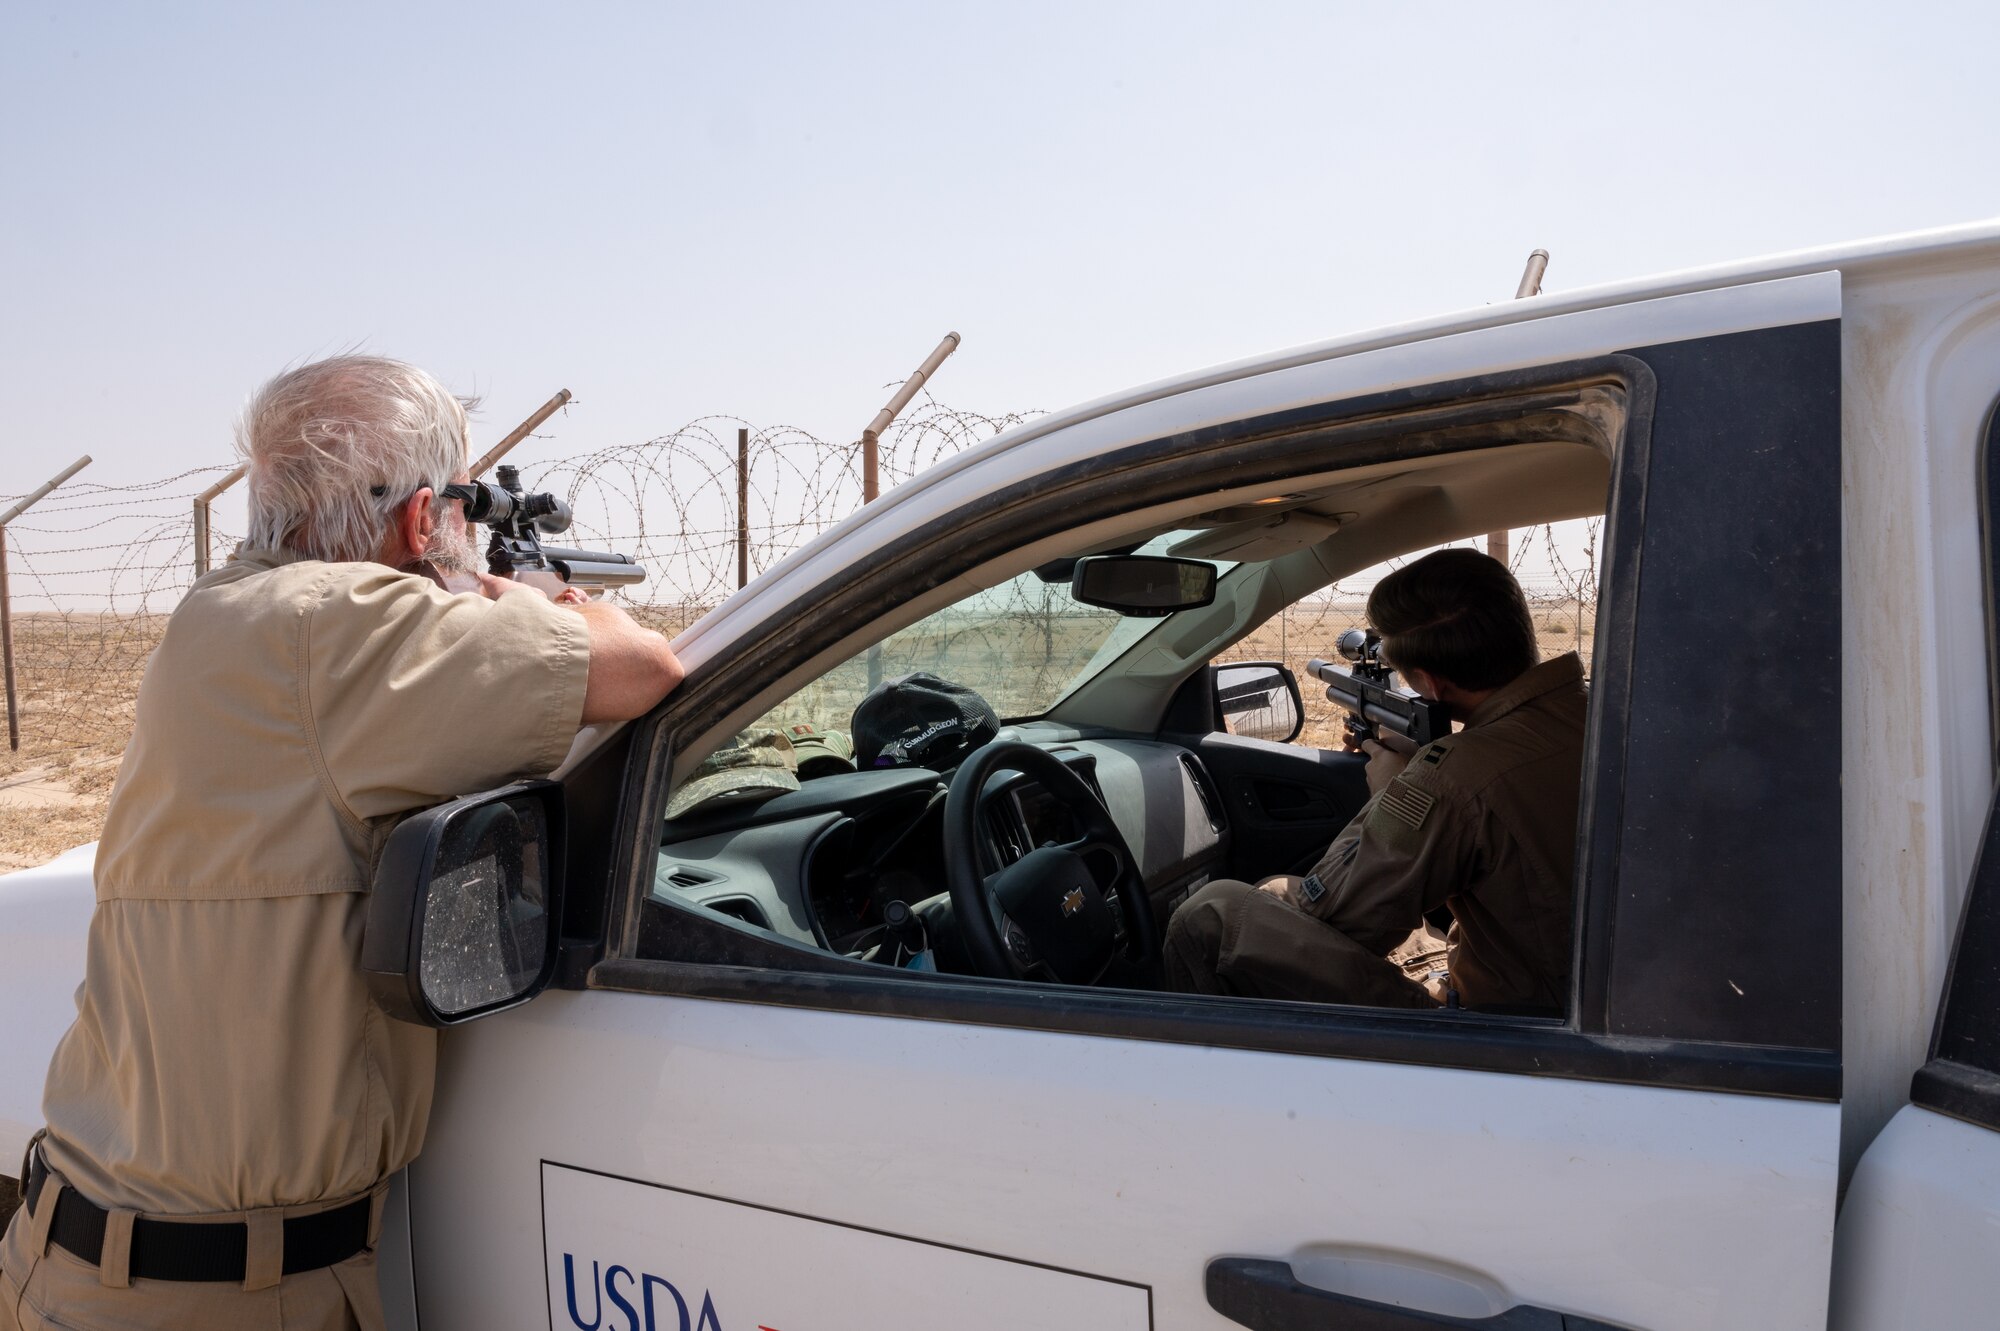 The 386th Air Expeditionary Wing Safety office works with the U.S. Department of Agriculture to depredate wildlife that poses a risk to aircraft, under the Bird/wildlife Aircraft Strike Hazard program.  The USDA are hired as subject matter experts on wildlife population and habitat management.